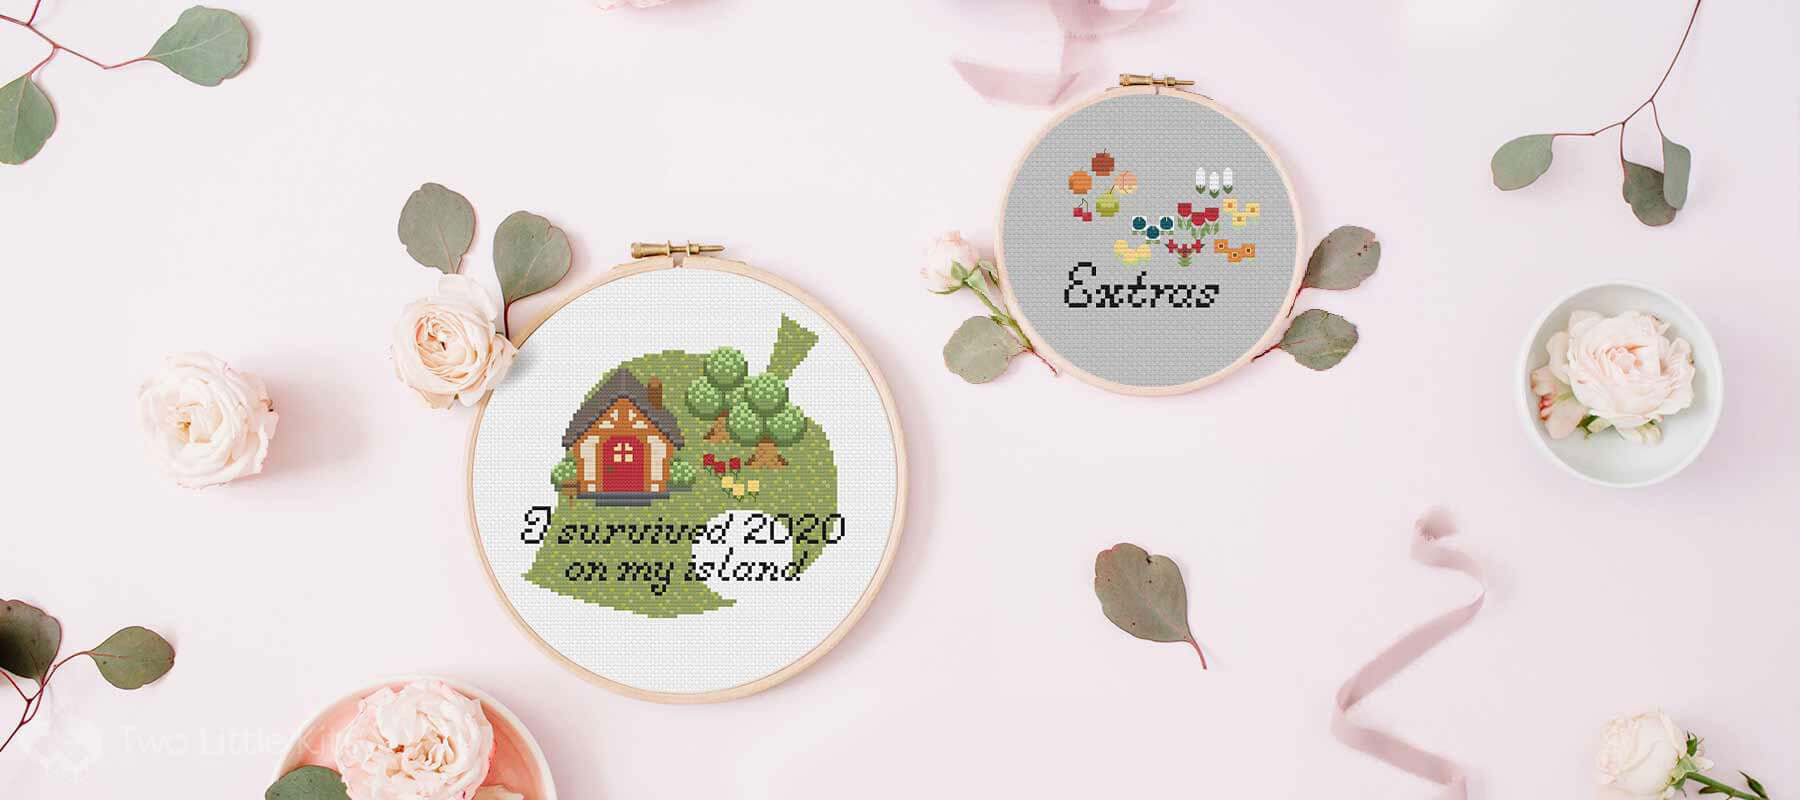 Latest Cross-Stitch Pattern; 'Survived 2020'... and you can customise it yourself!